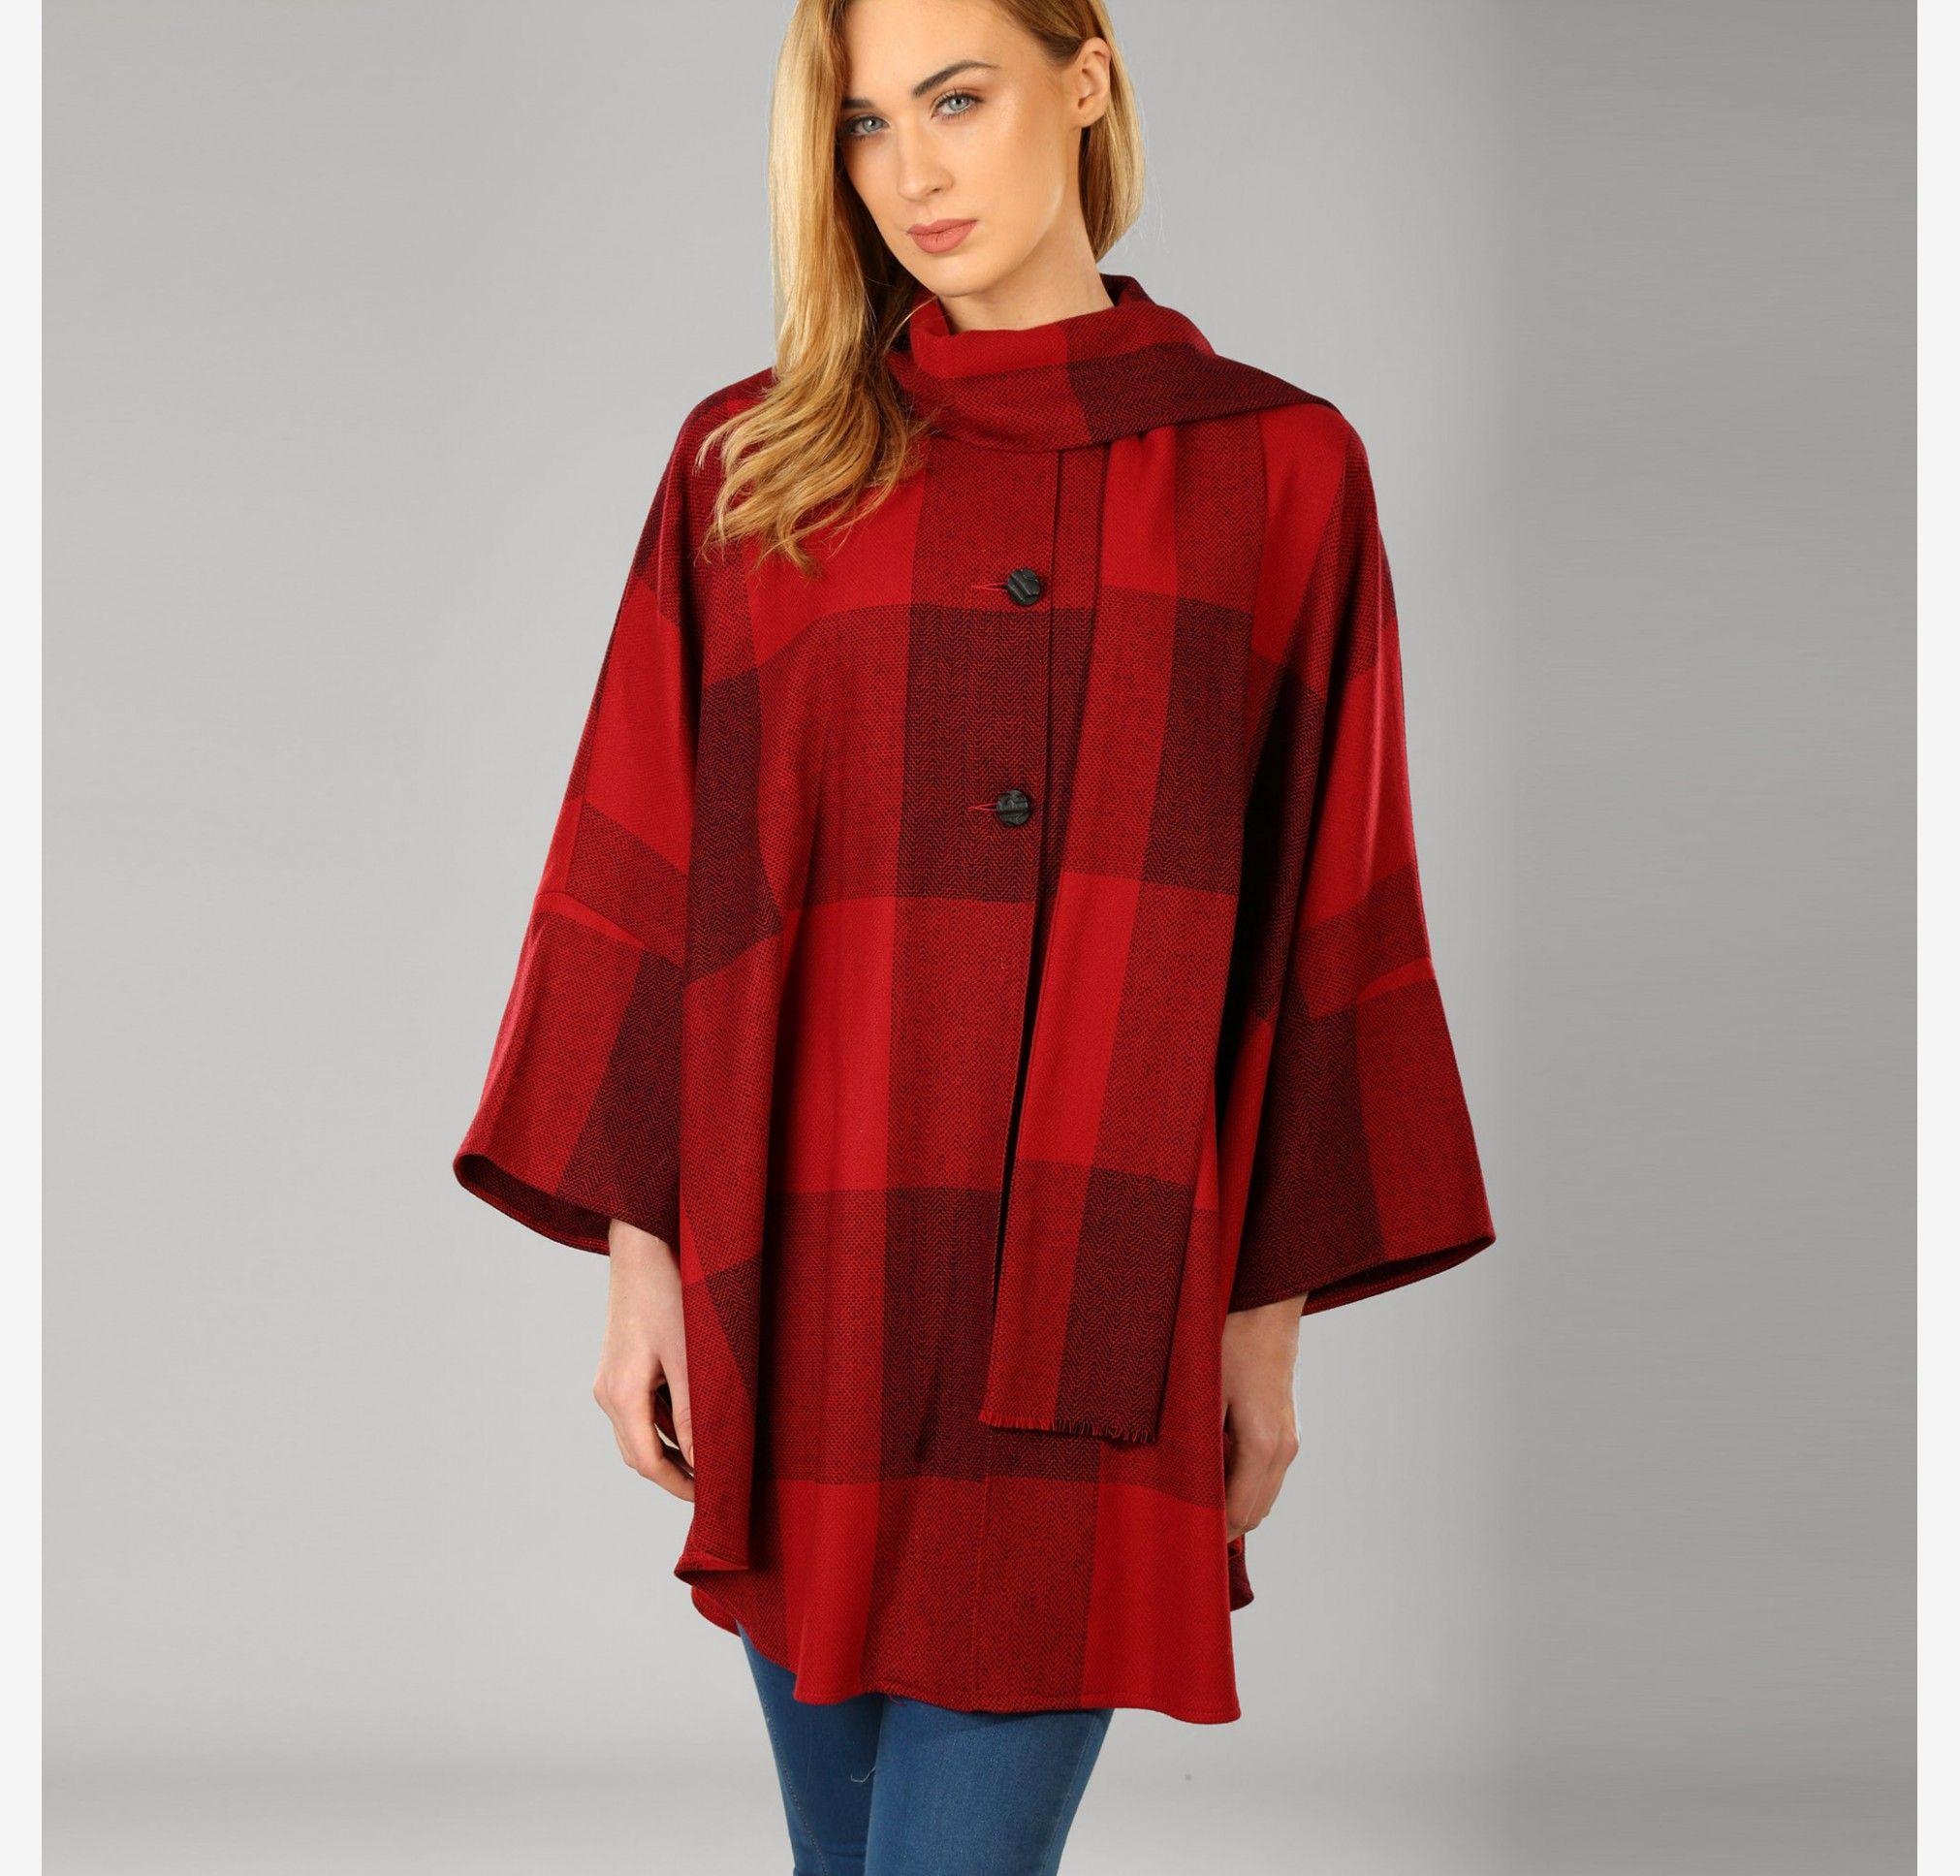 Red Check Clothing Logo - Womens Tweed Cape, Red Check